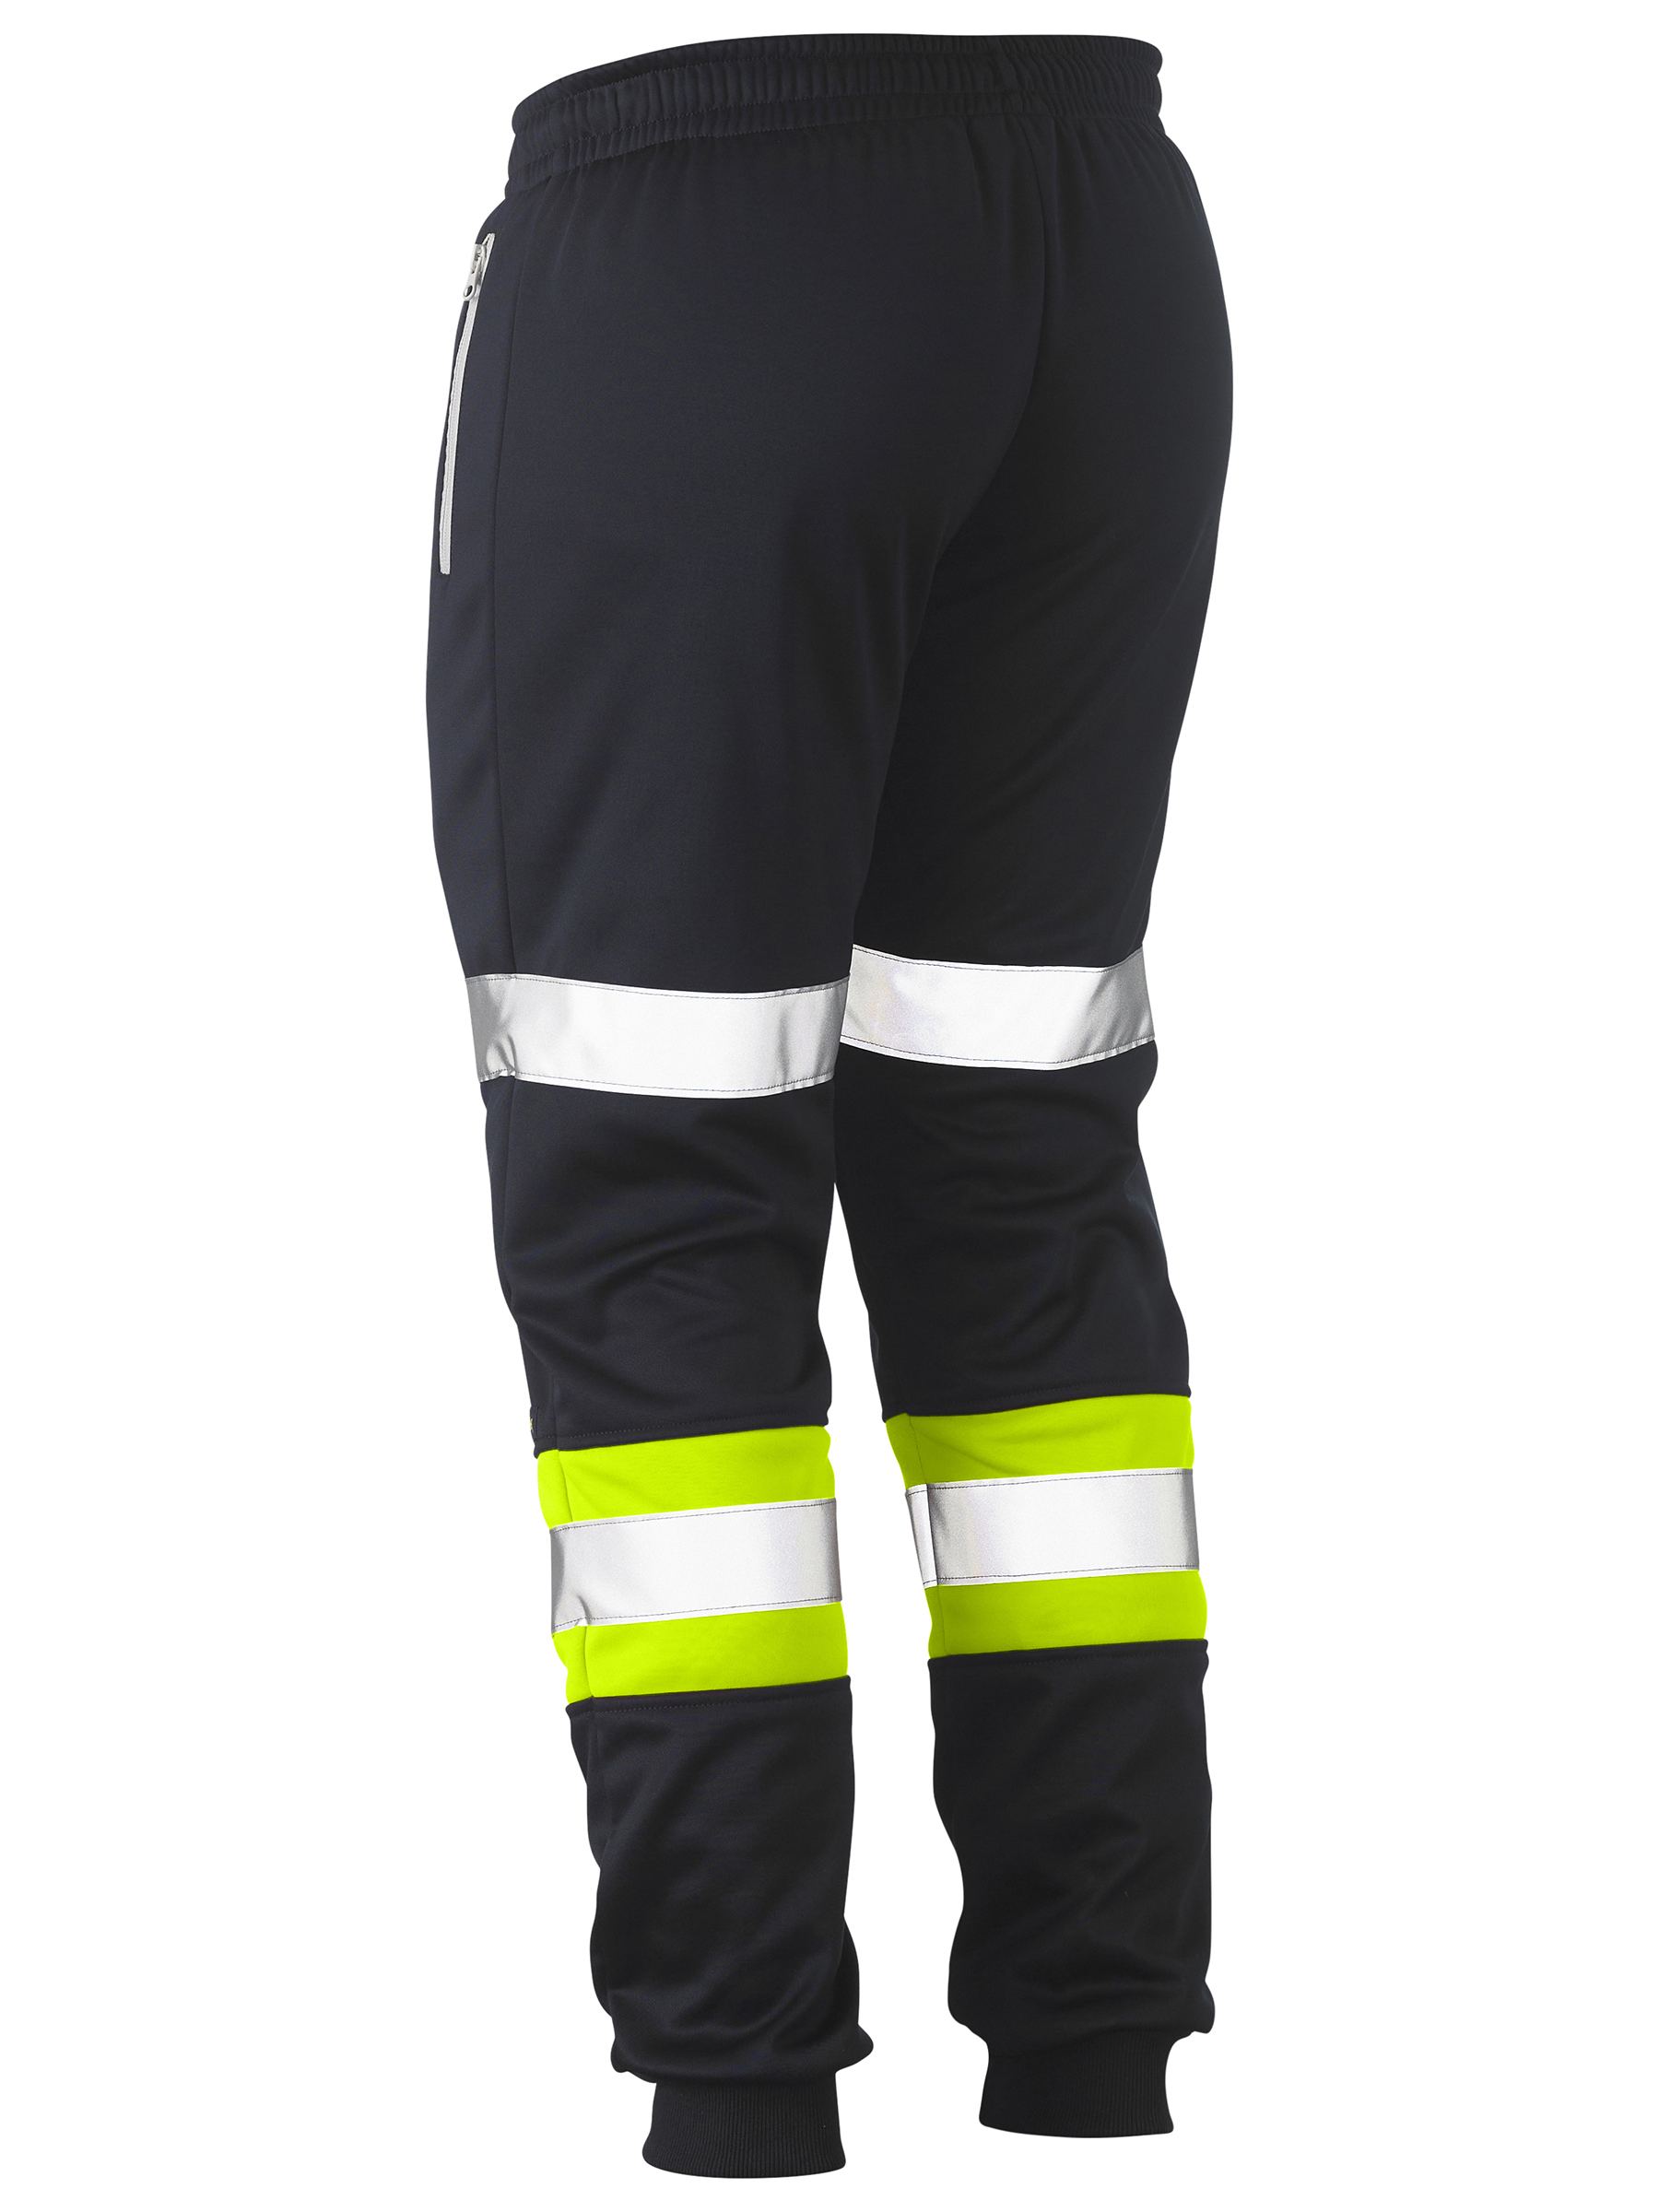 Taped biomotion track pants with full elasticised waist with drawcord -  BPK6202T - Bisley Workwear